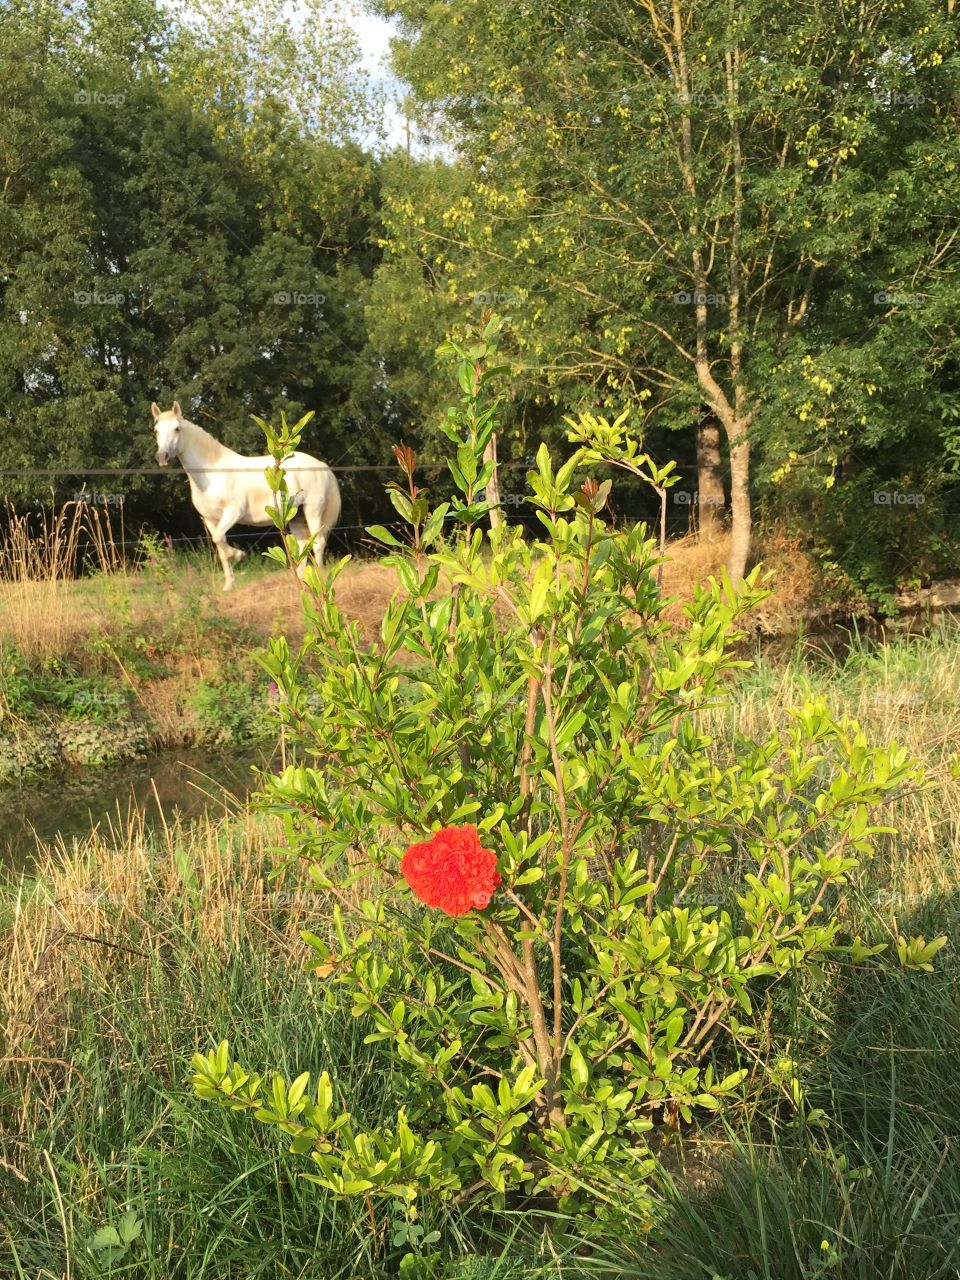 Flower of pomegranate and white horse 